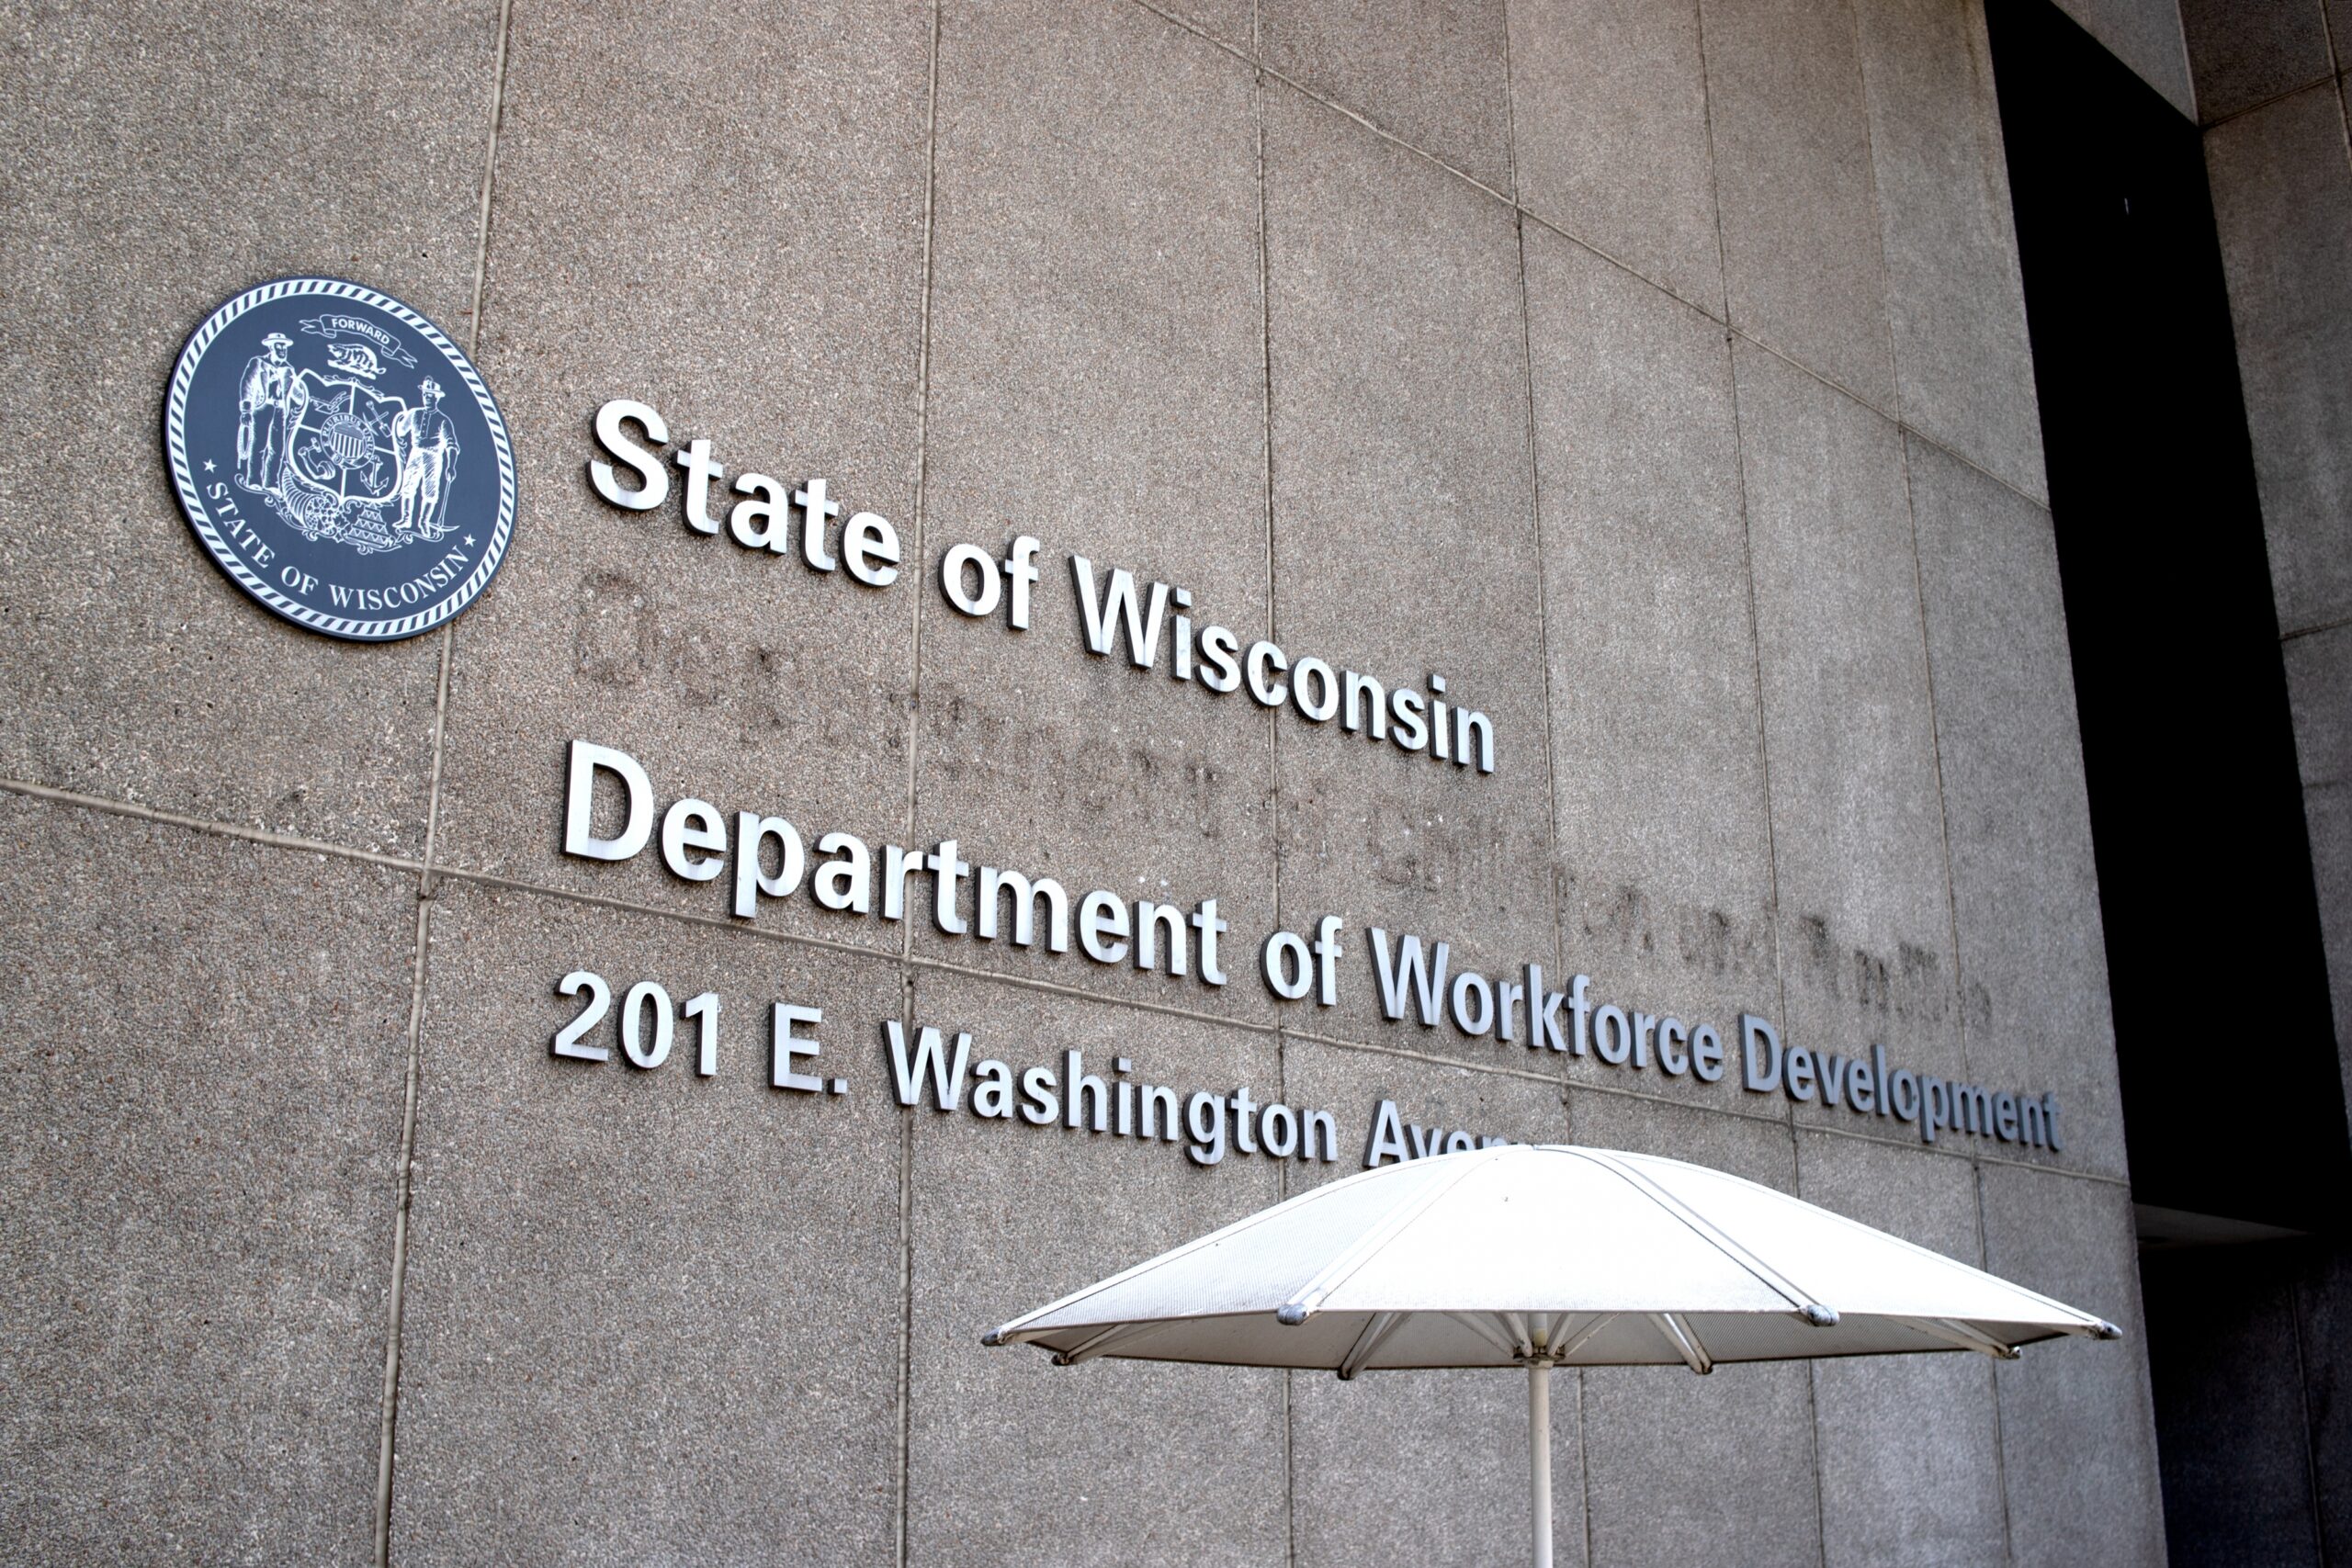 Outside the State of Wisconsin Department of Workforce Development building